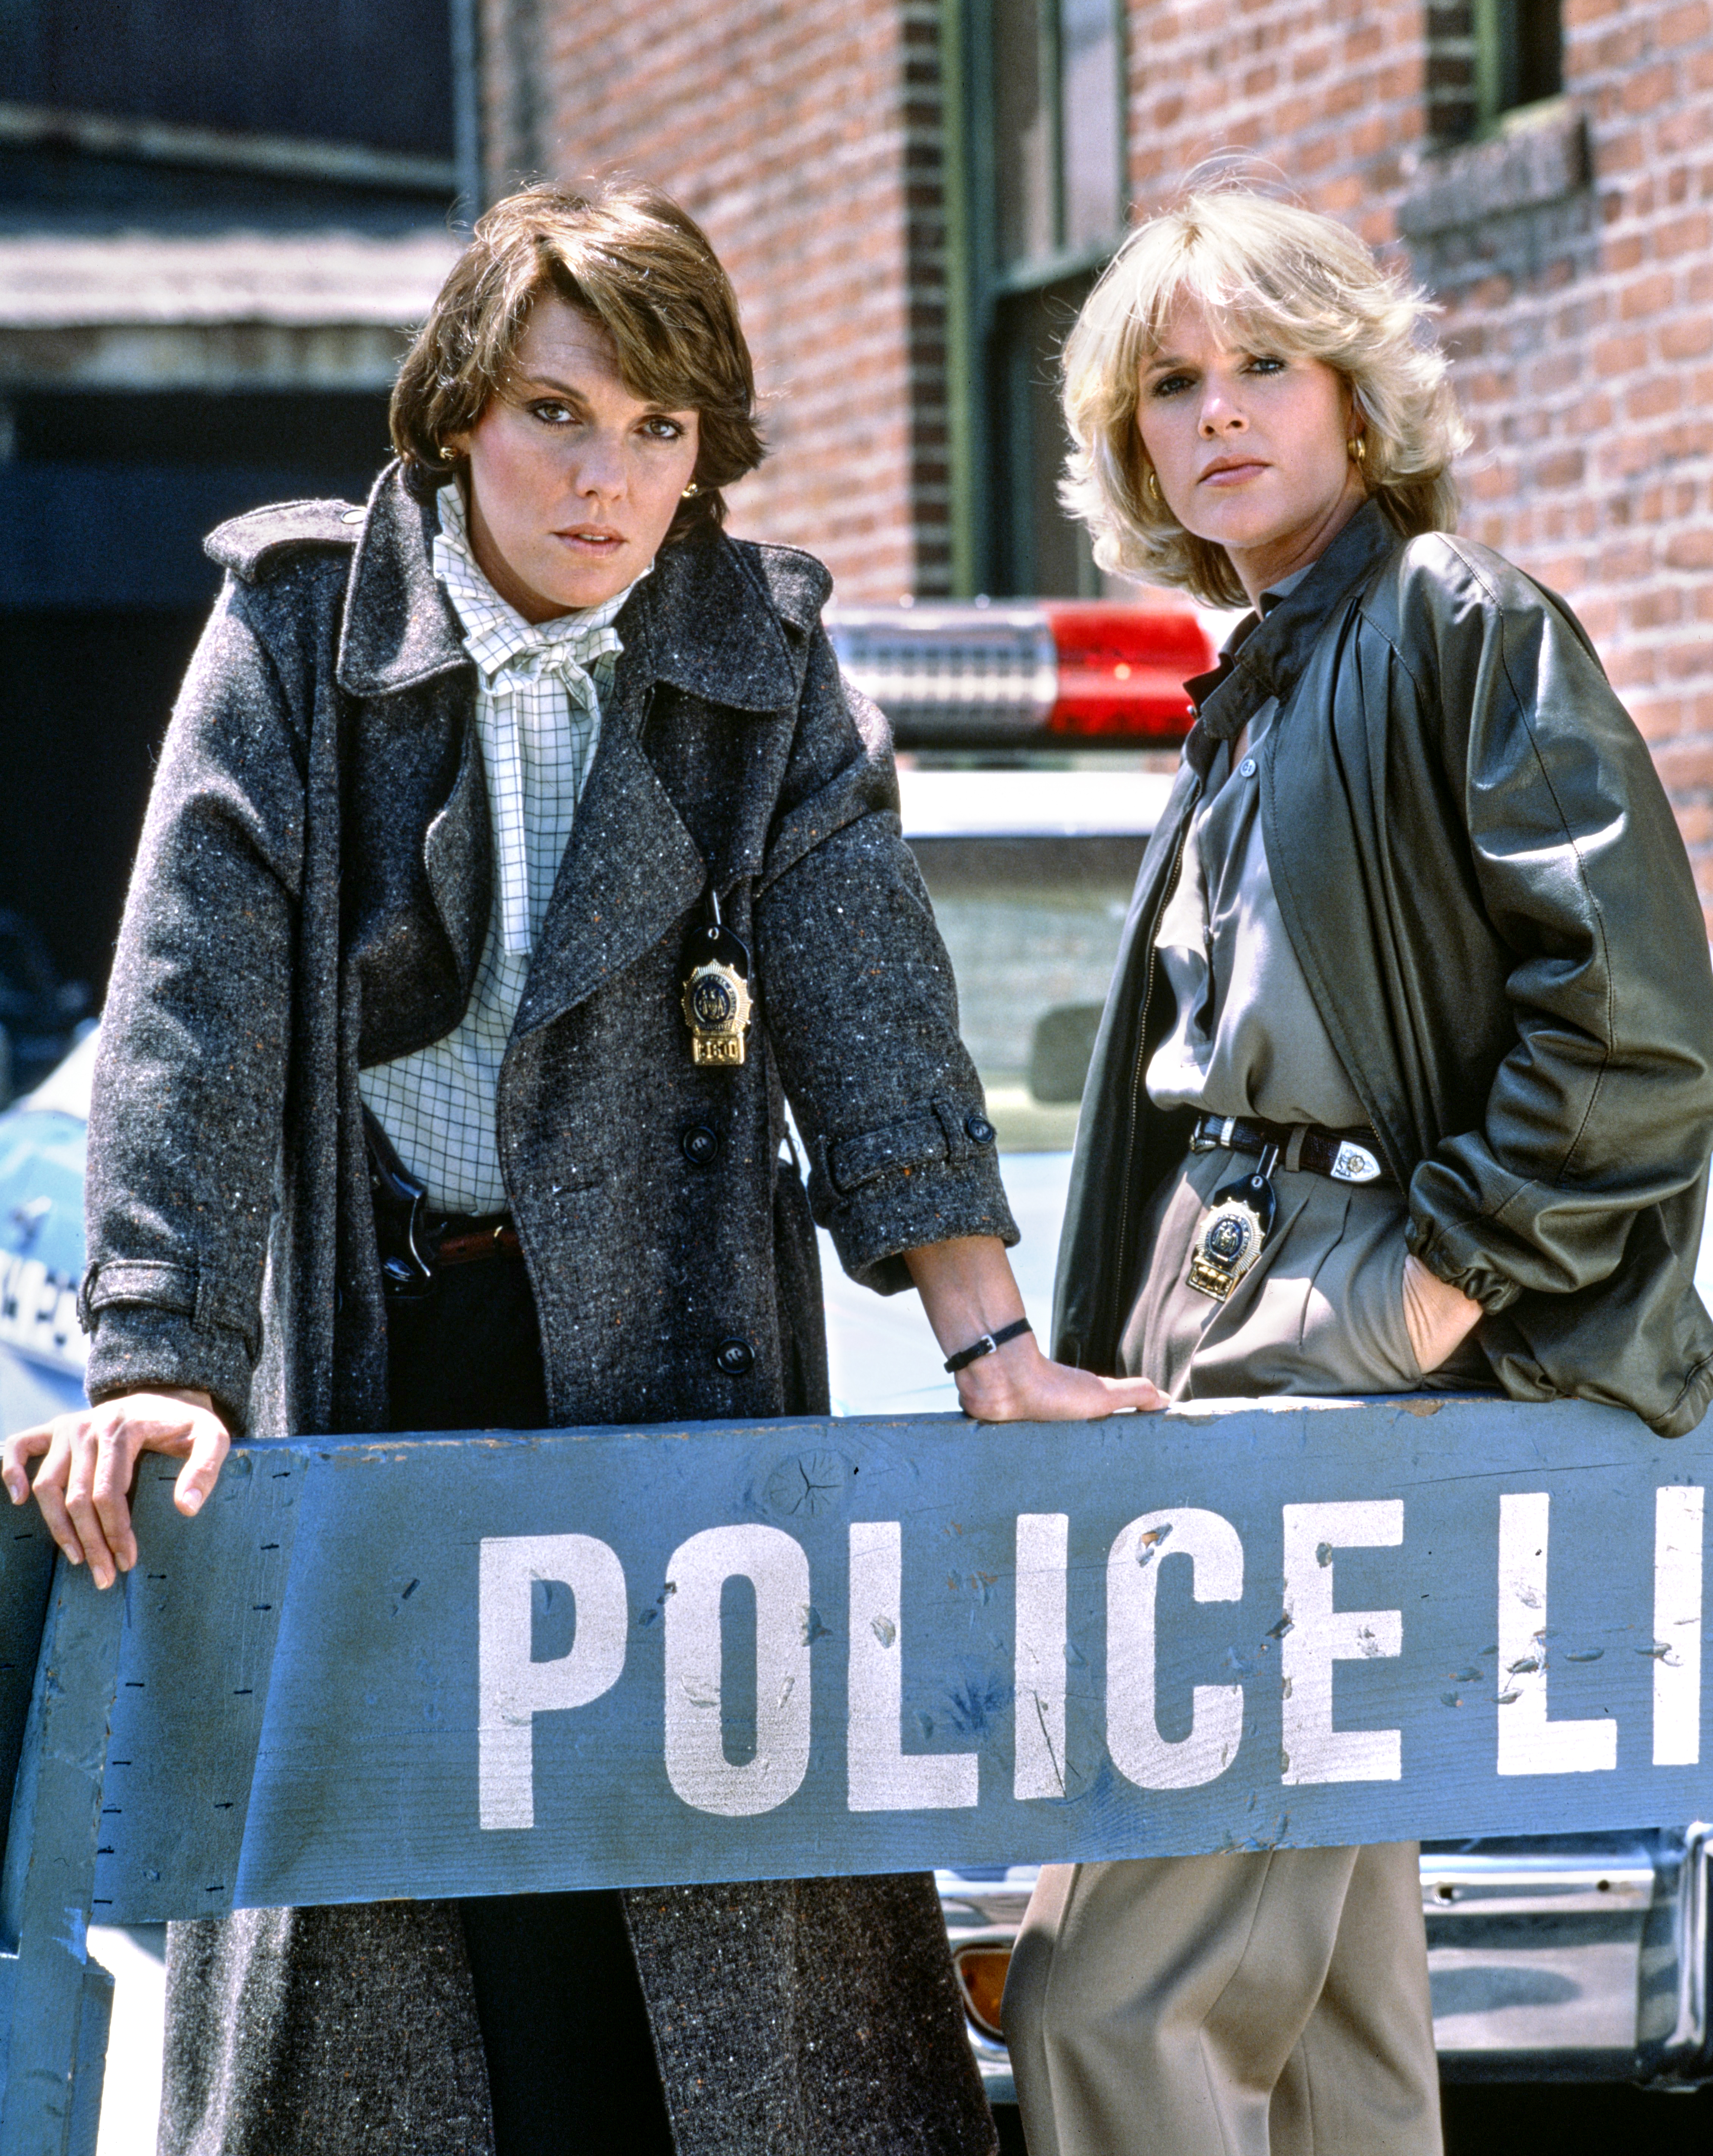 Tyne Daly (as Mary Beth Lacey) and Sharon Gless (as Christine Cagney) in "Cagney & Lacey" on March 25, 1982. | Source: Getty Images